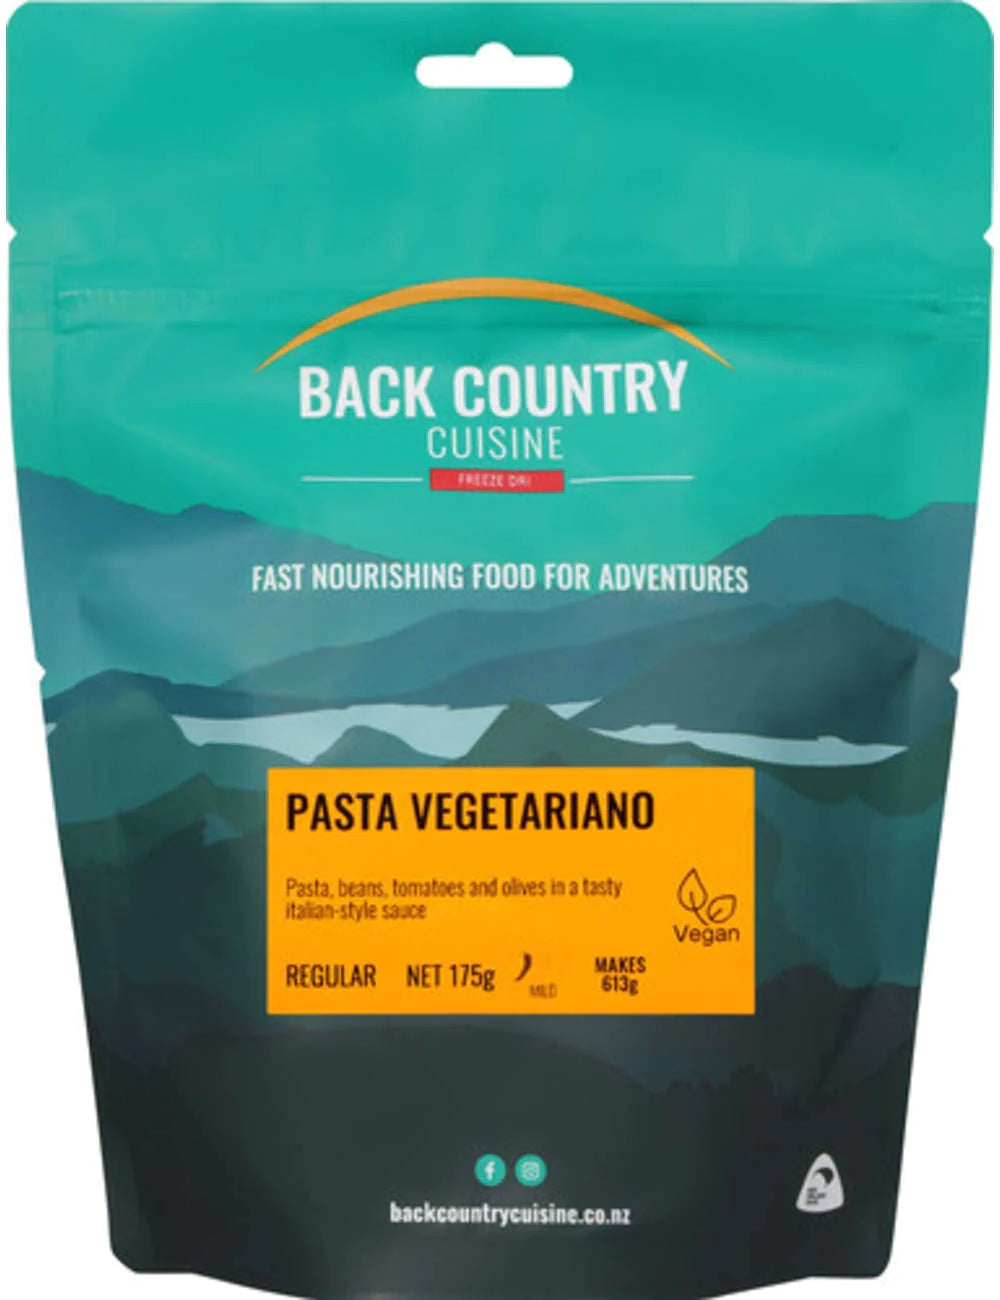 Back Country Cuisine - Pasta Vegetariano